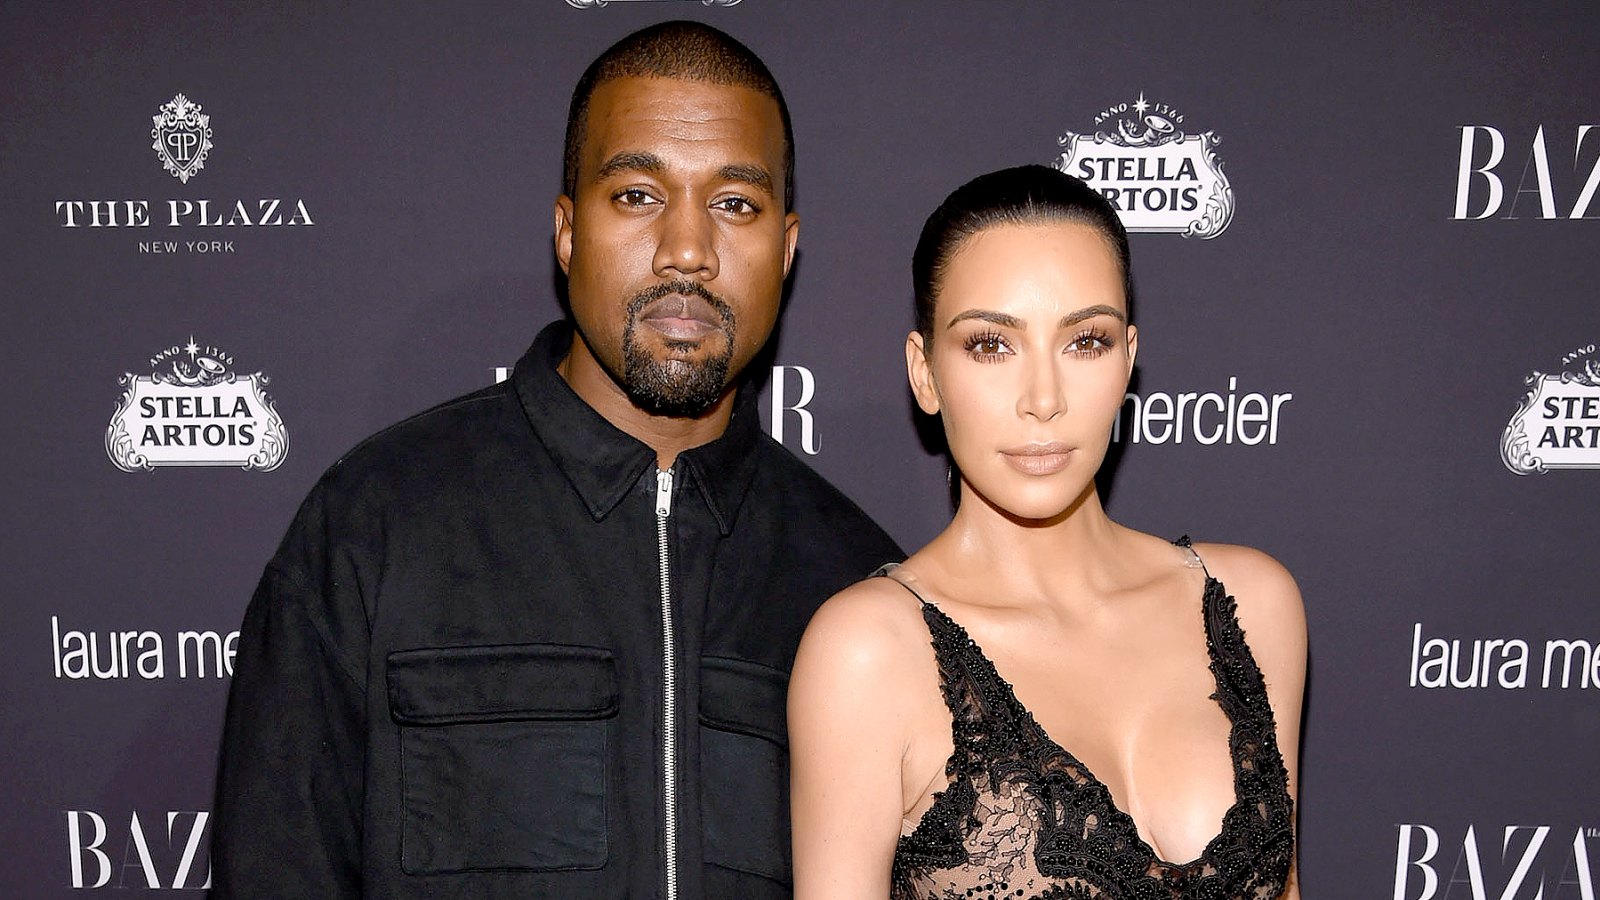 Kanye West and Kim Kardashian West attend Harper's Bazaar's celebration of "ICONS By Carine Roitfeld" presented by Infor, Laura Mercier, and Stella Artois at The Plaza Hotel on September 9, 2016 in New York City.